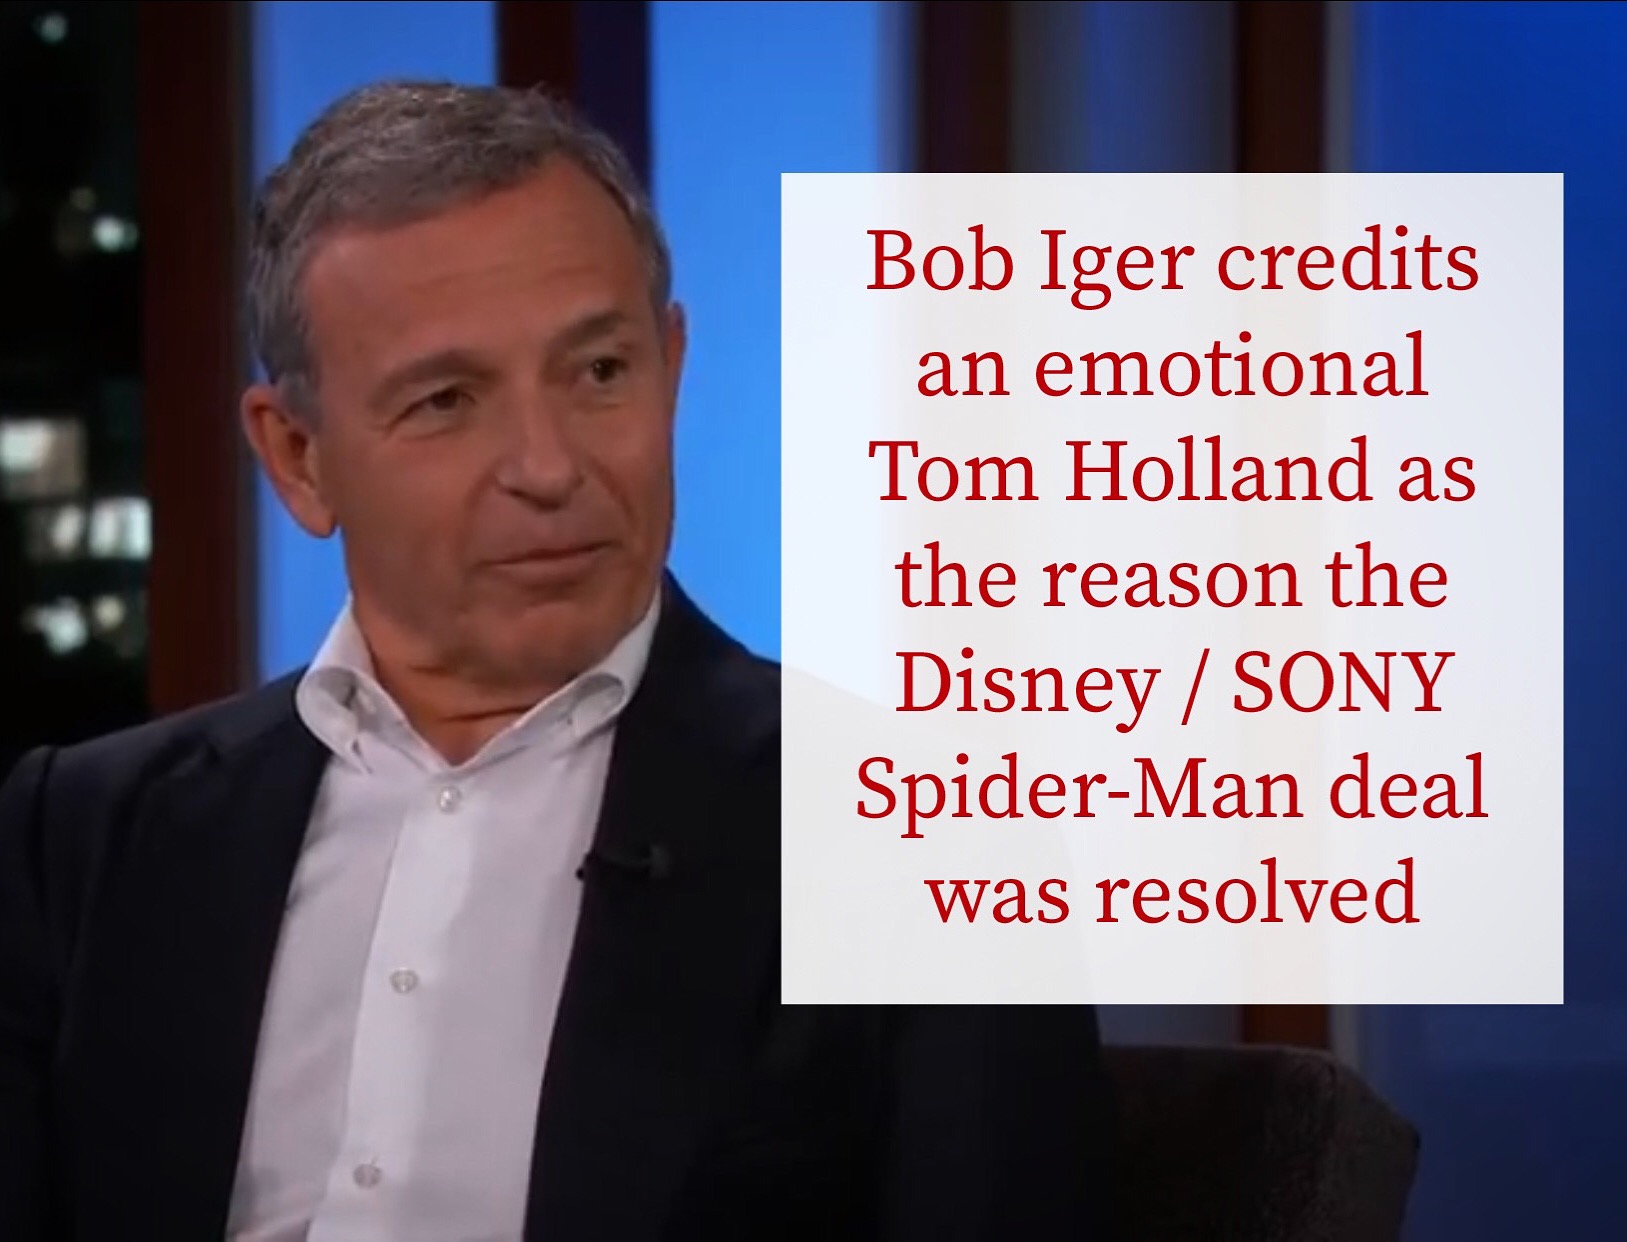 presentation - Bob Iger credits an emotional Tom Holland as the reason the Disney Sony SpiderMan deal was resolved